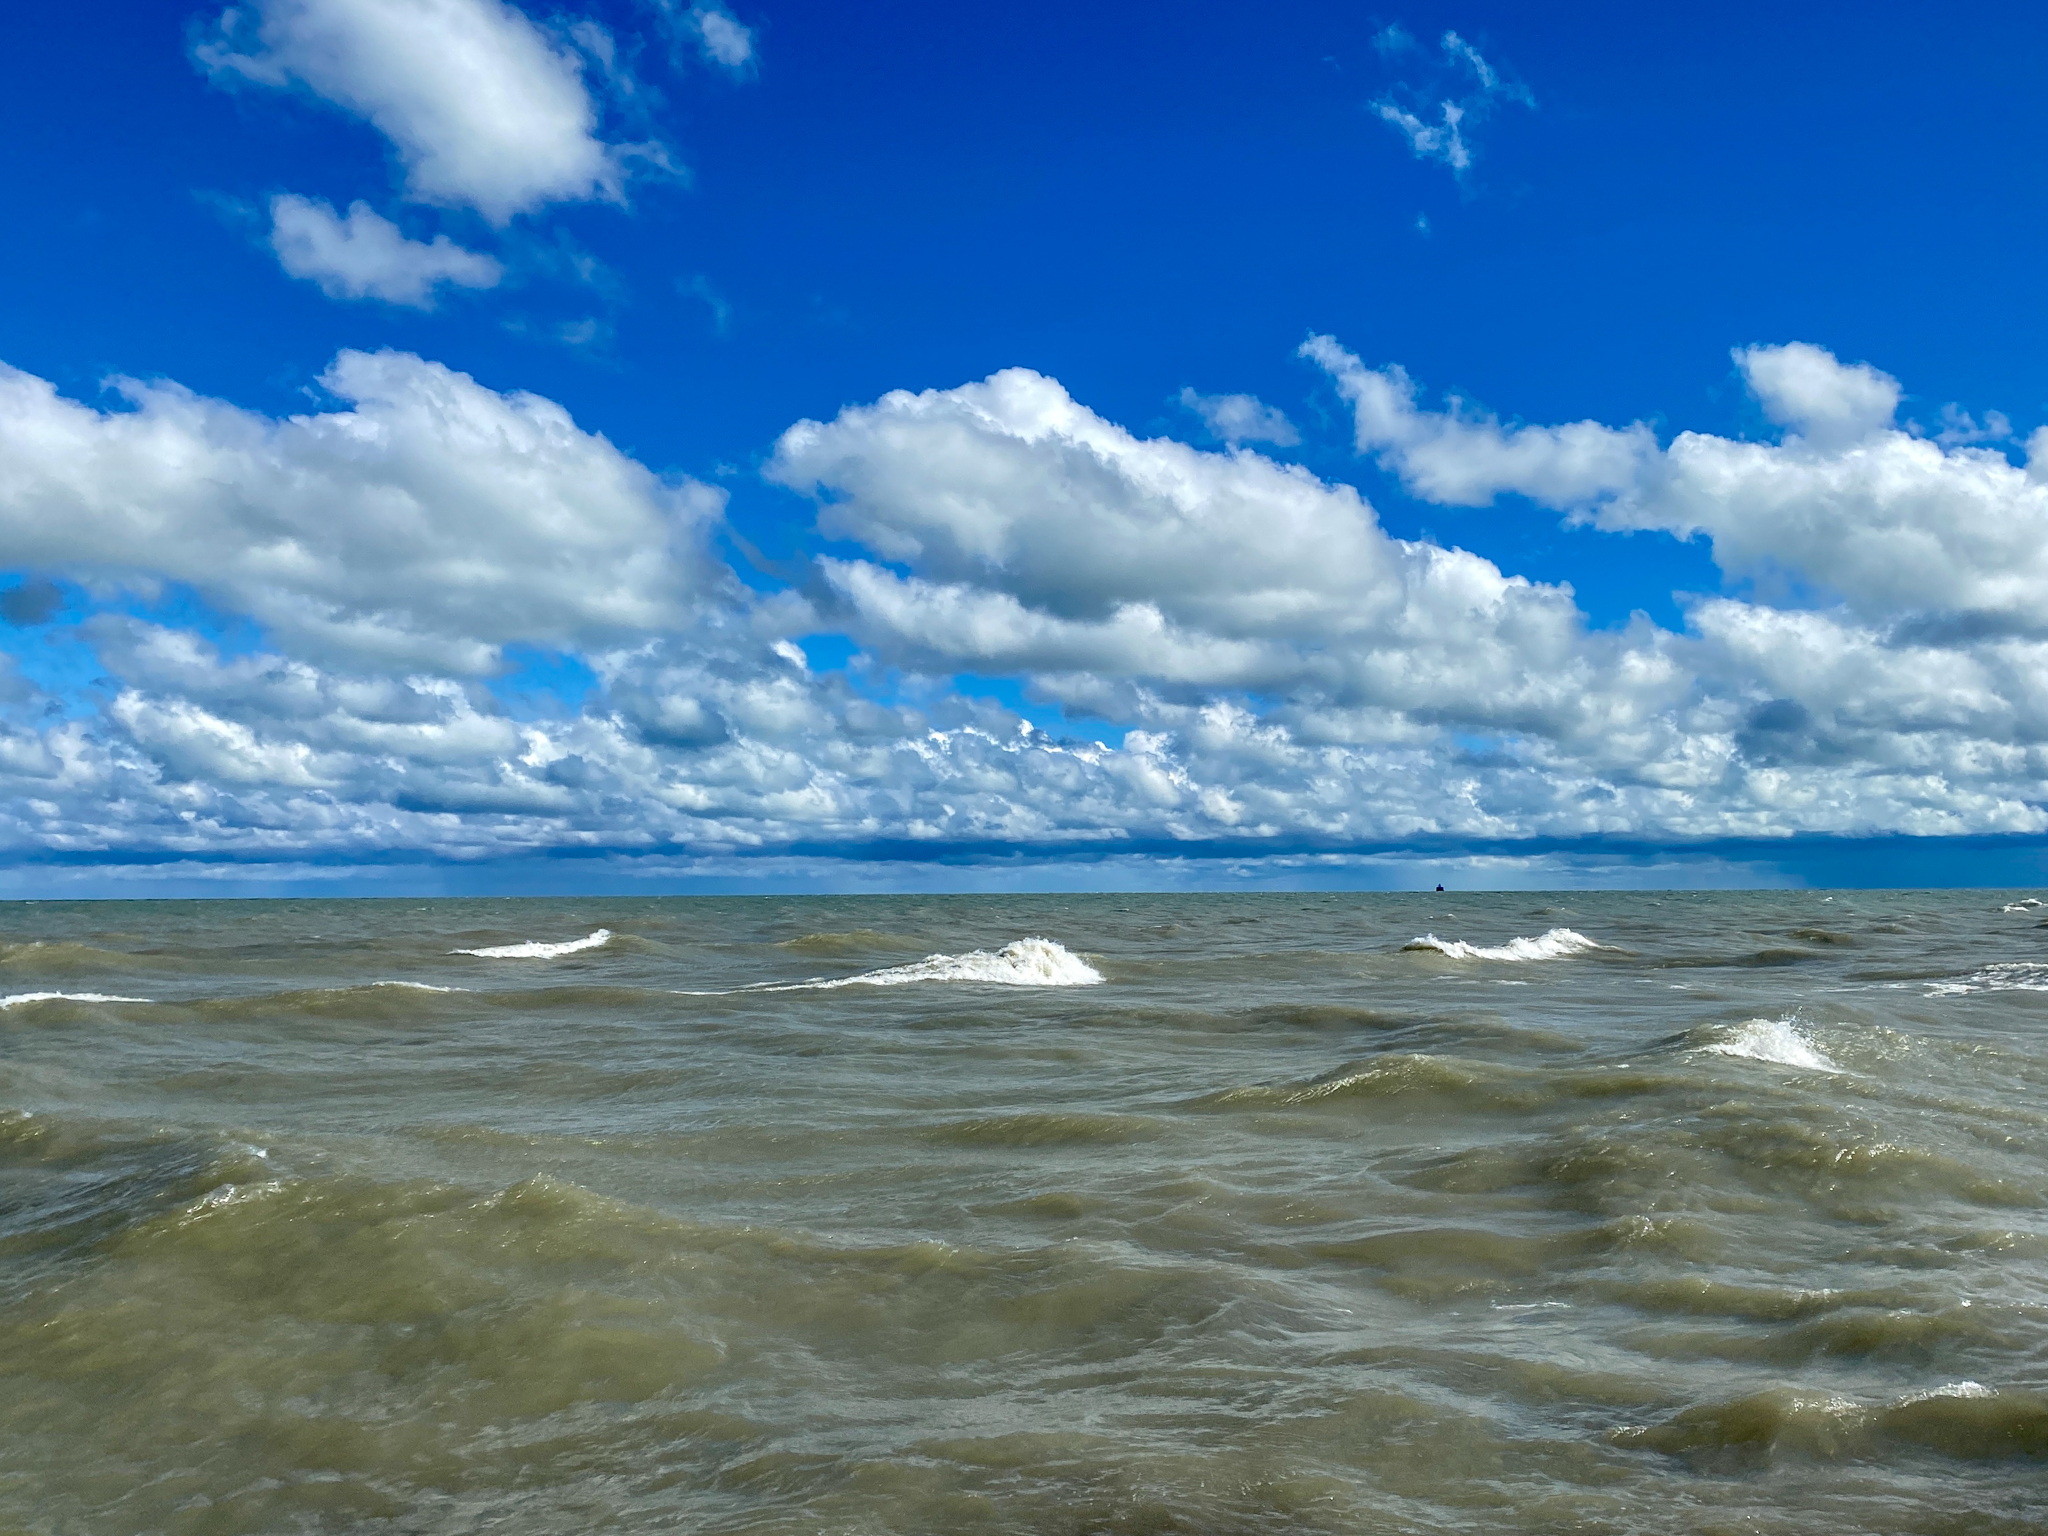 A wide lake horizon with a deep blue sky dotted with bright white clouds, the lake surface choppy and pale green